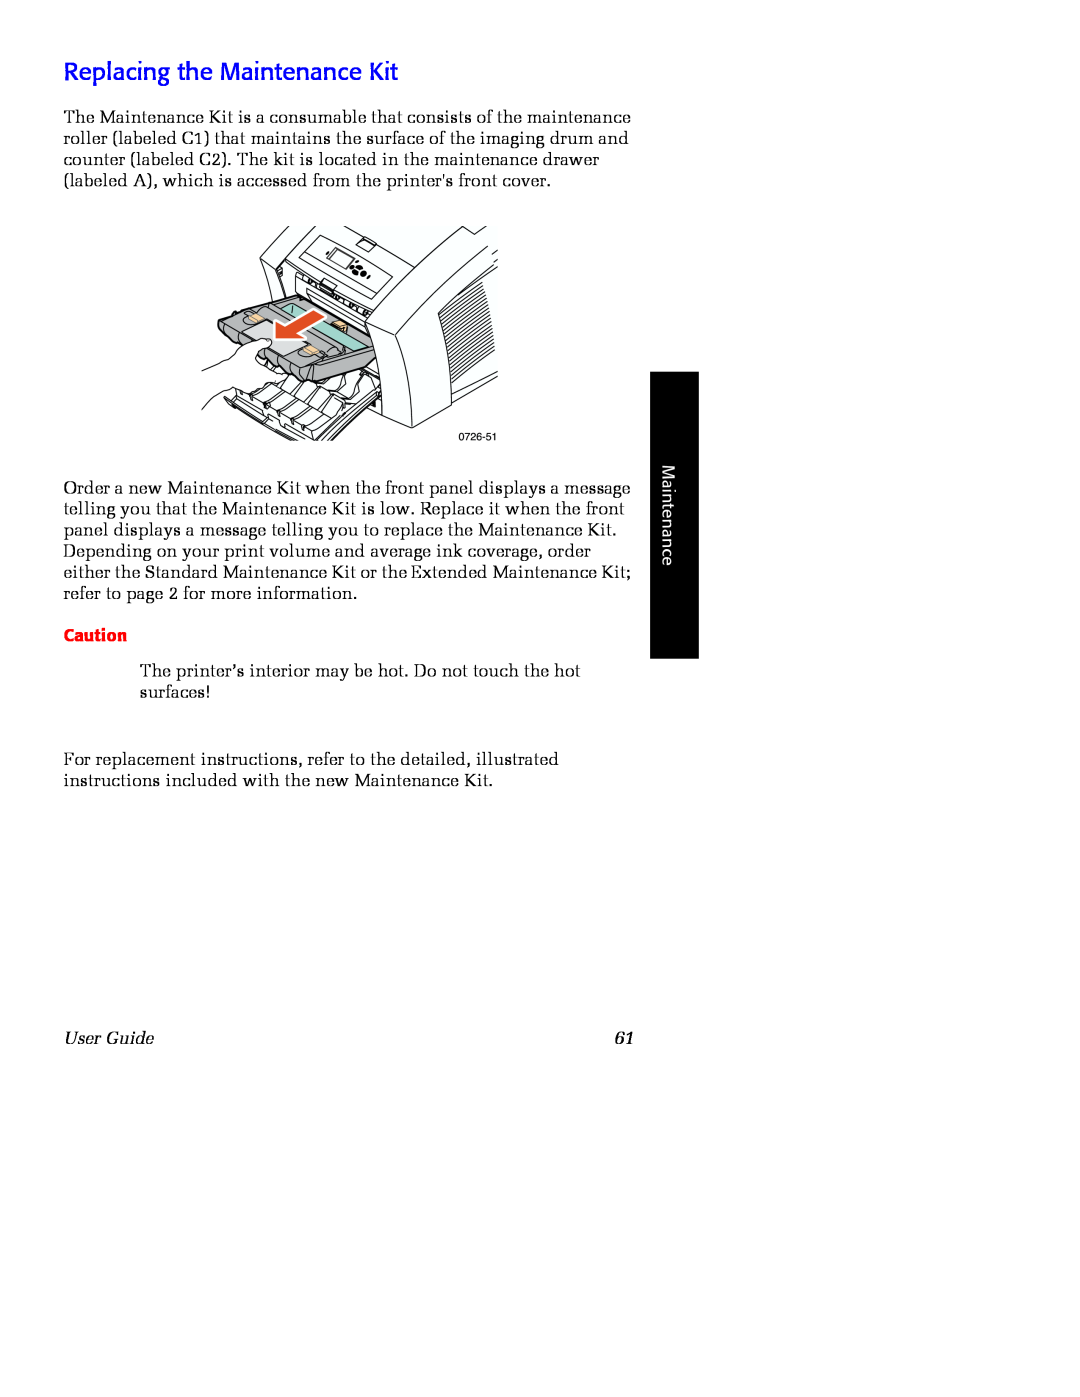 Xerox Phaser 860 manual Replacing the Maintenance Kit, 0726-51, User Guide 